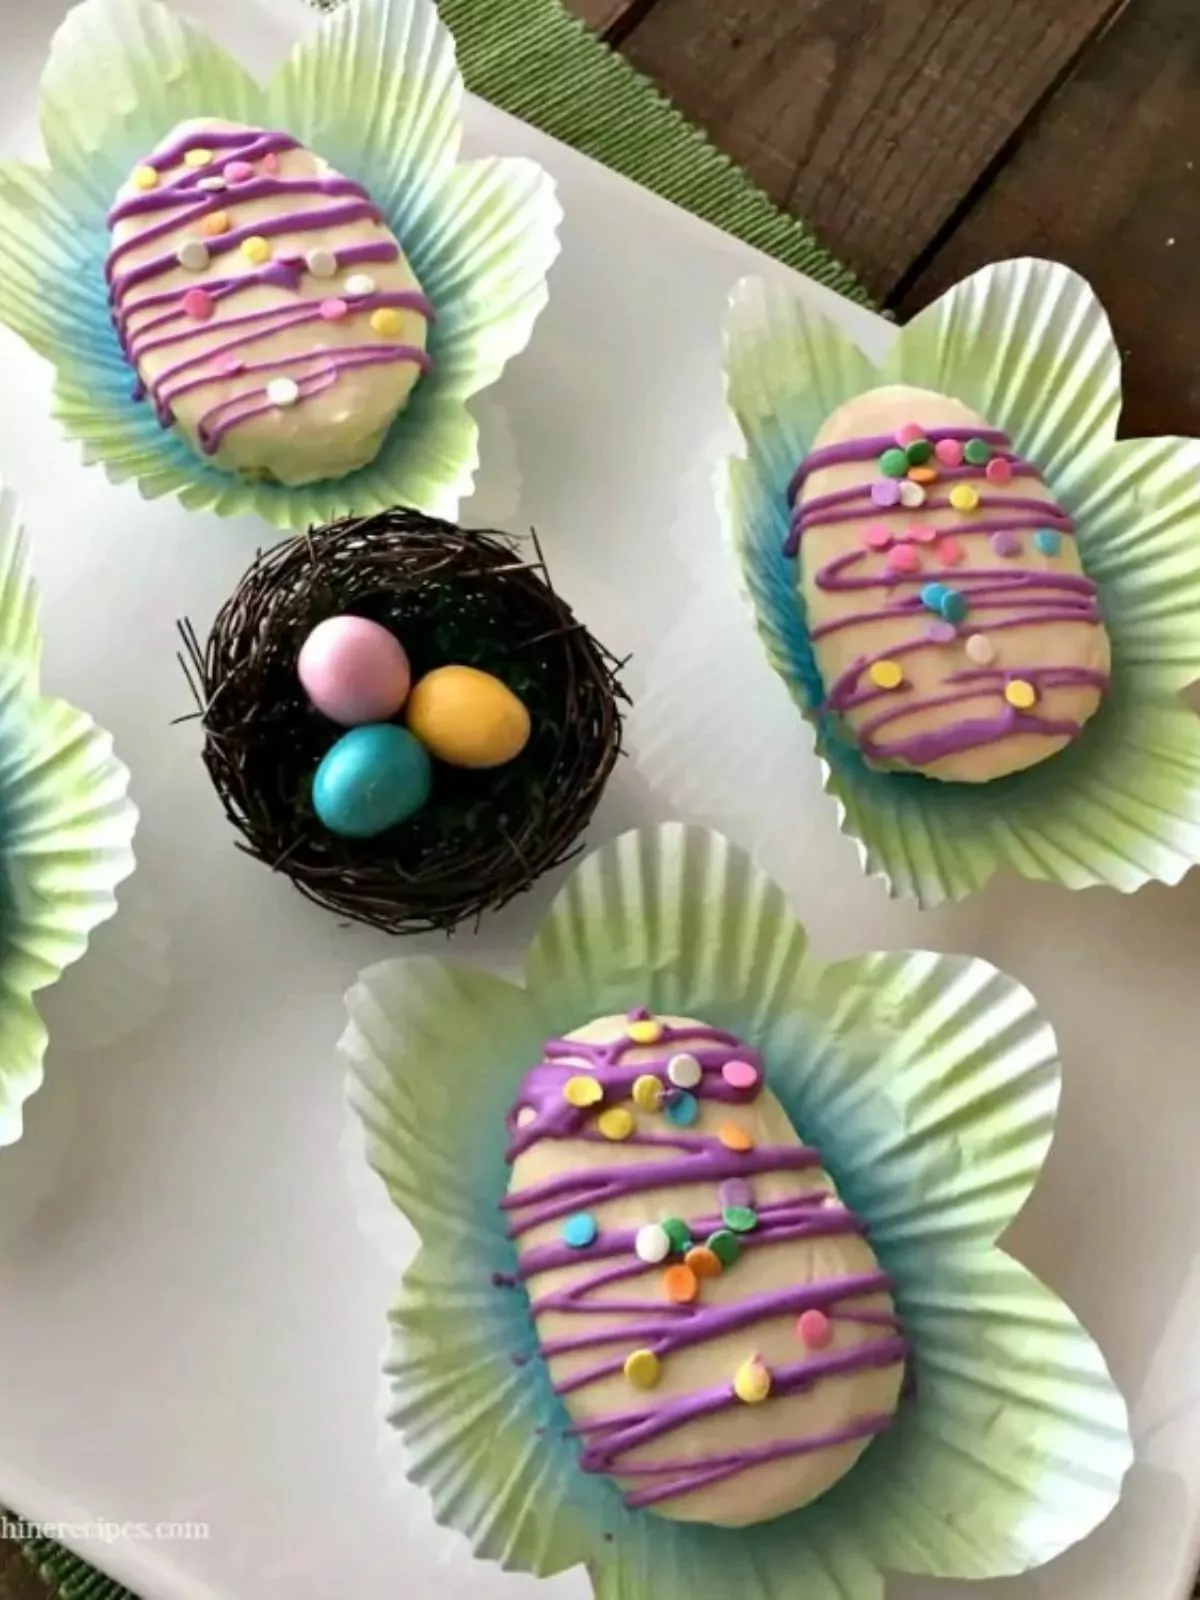 decorated cakes in the shape of eggs in cupcake liner on white plate.